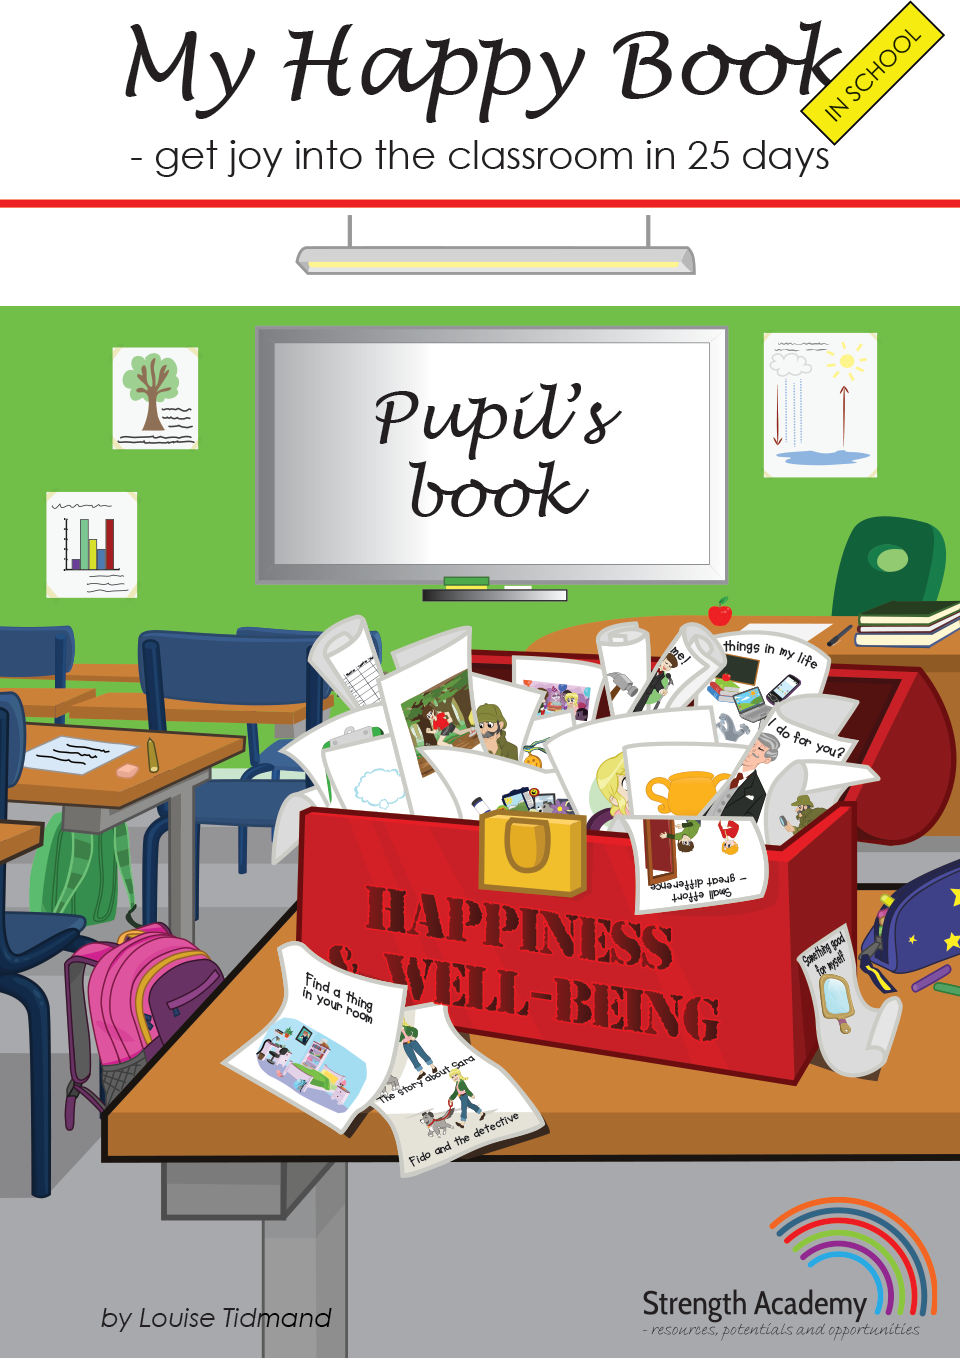 My Happy Book in School - get joy into the classroom in 25 days, pupil's book